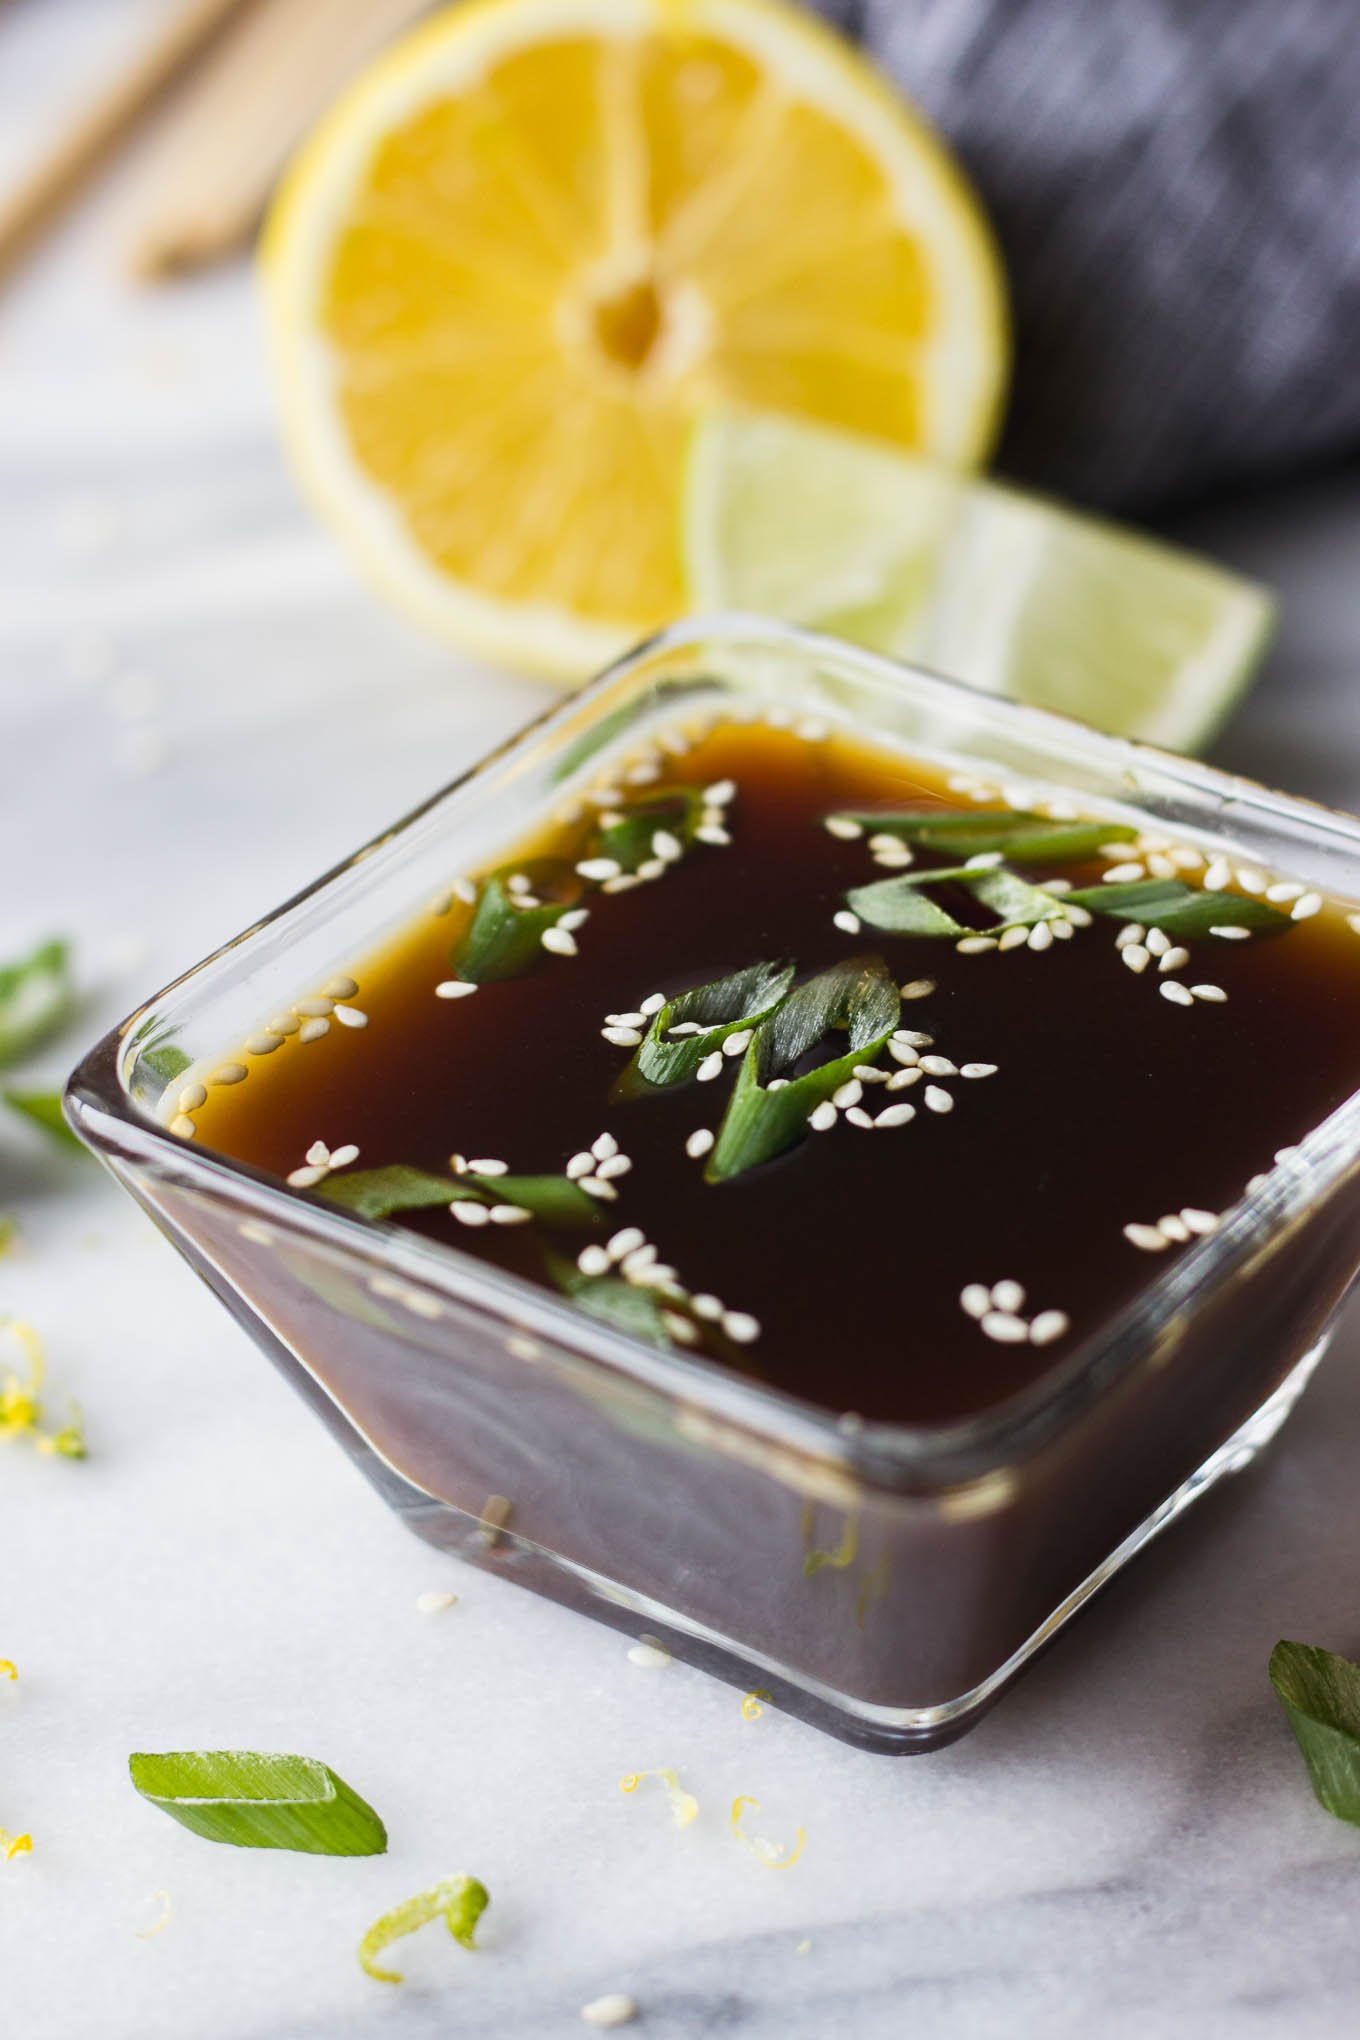 Ponzu sauce in glass dipping bowl garnished with green onion and sesame seeds.